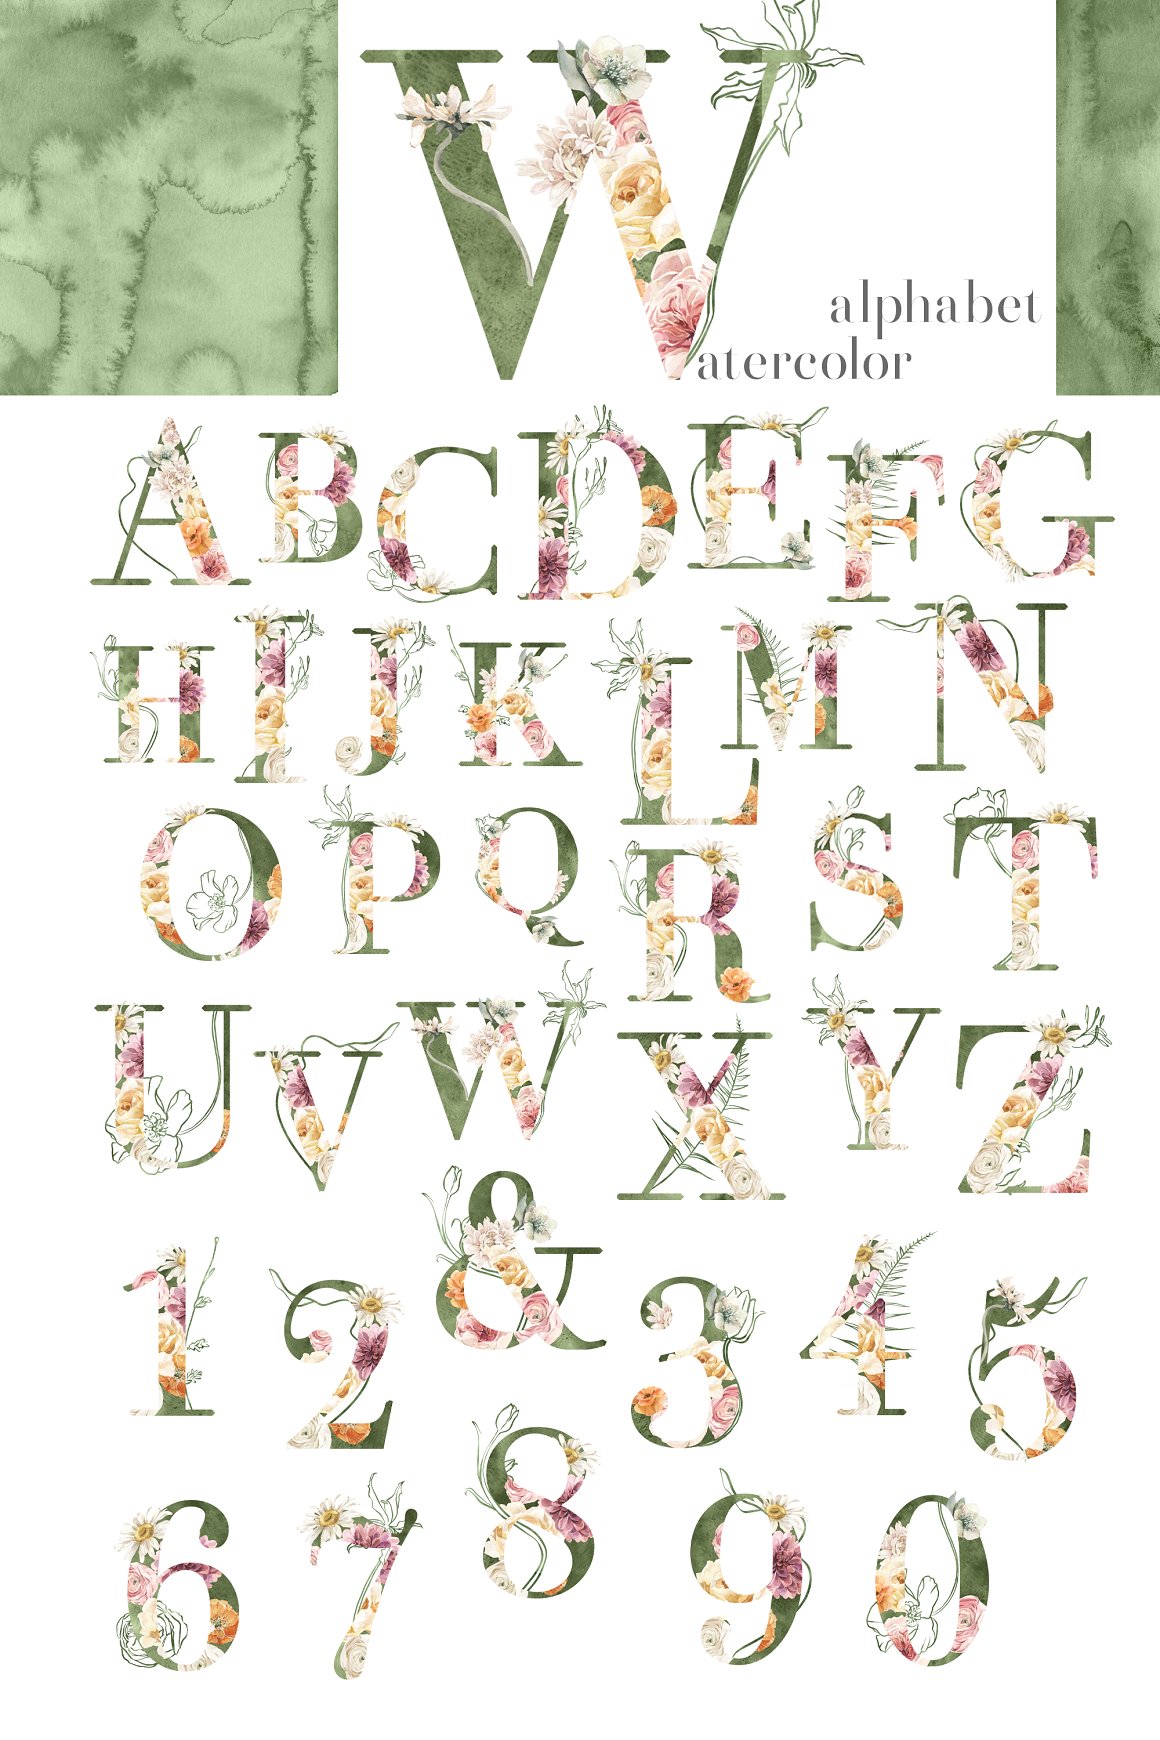 The alphabet is decorated with watercolor flowers.